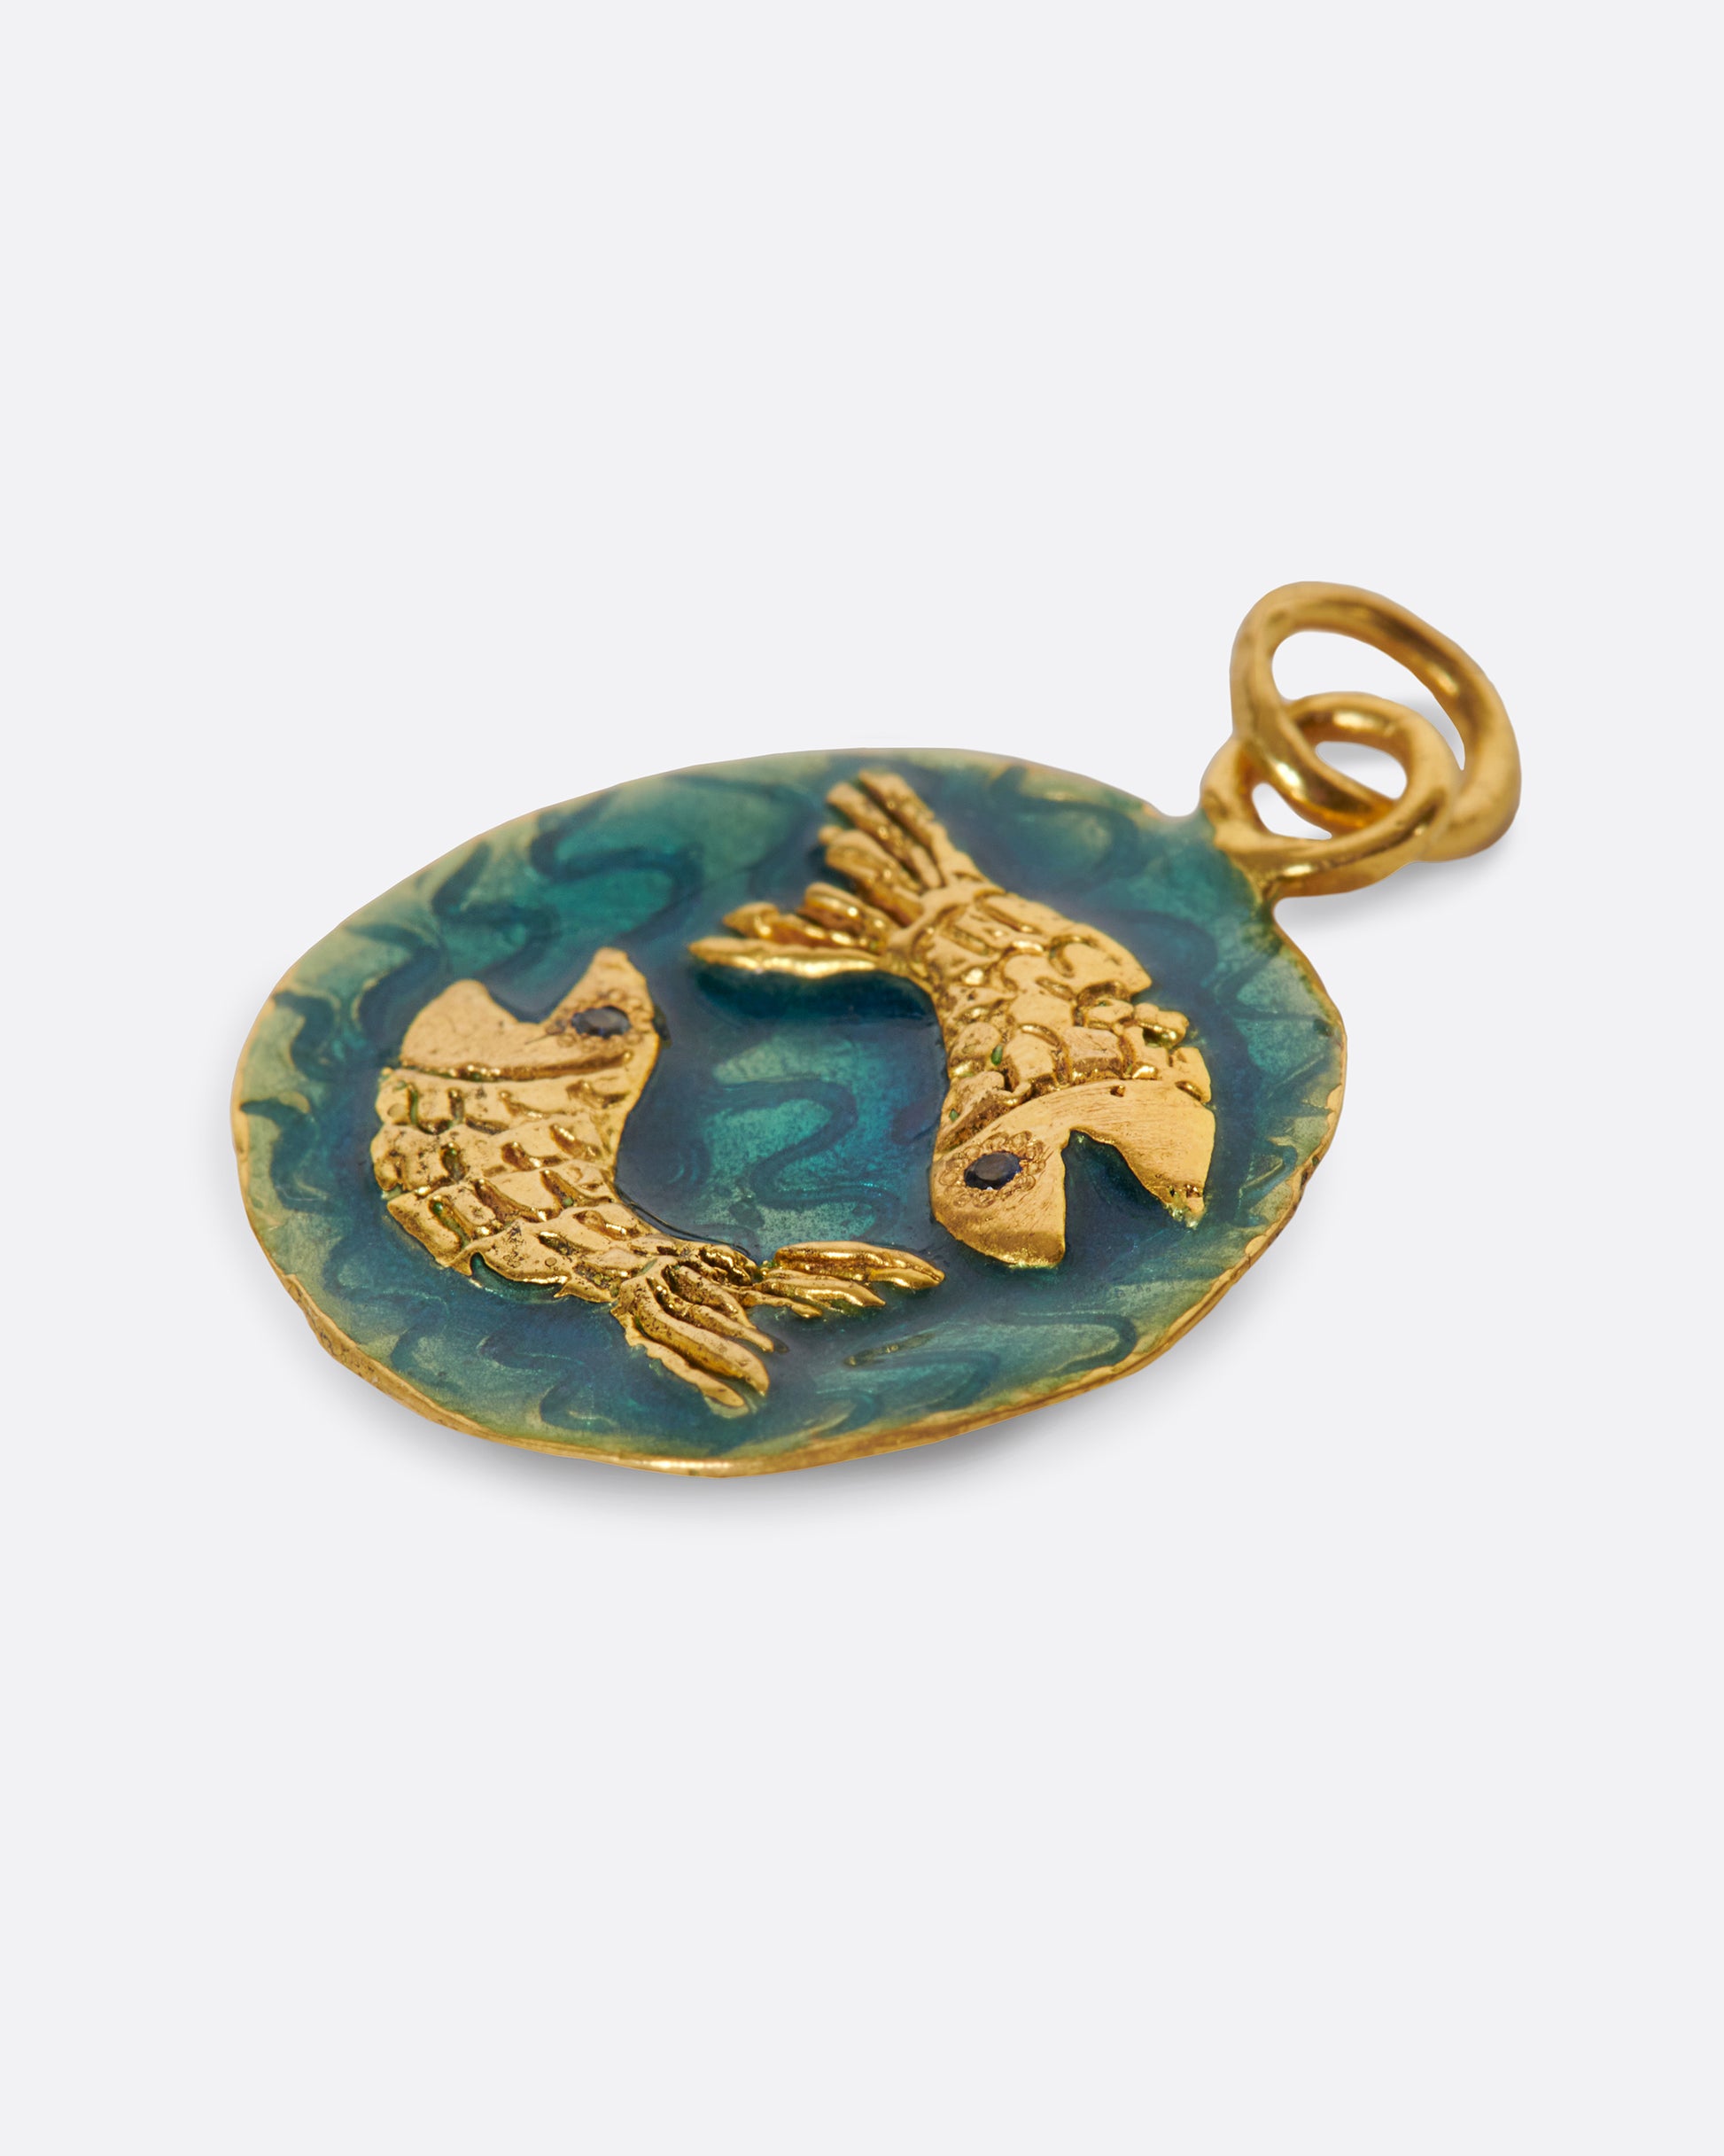 A round hand-sculpted pendant with the Pisces symbol, each fish with a blue sapphire eye.